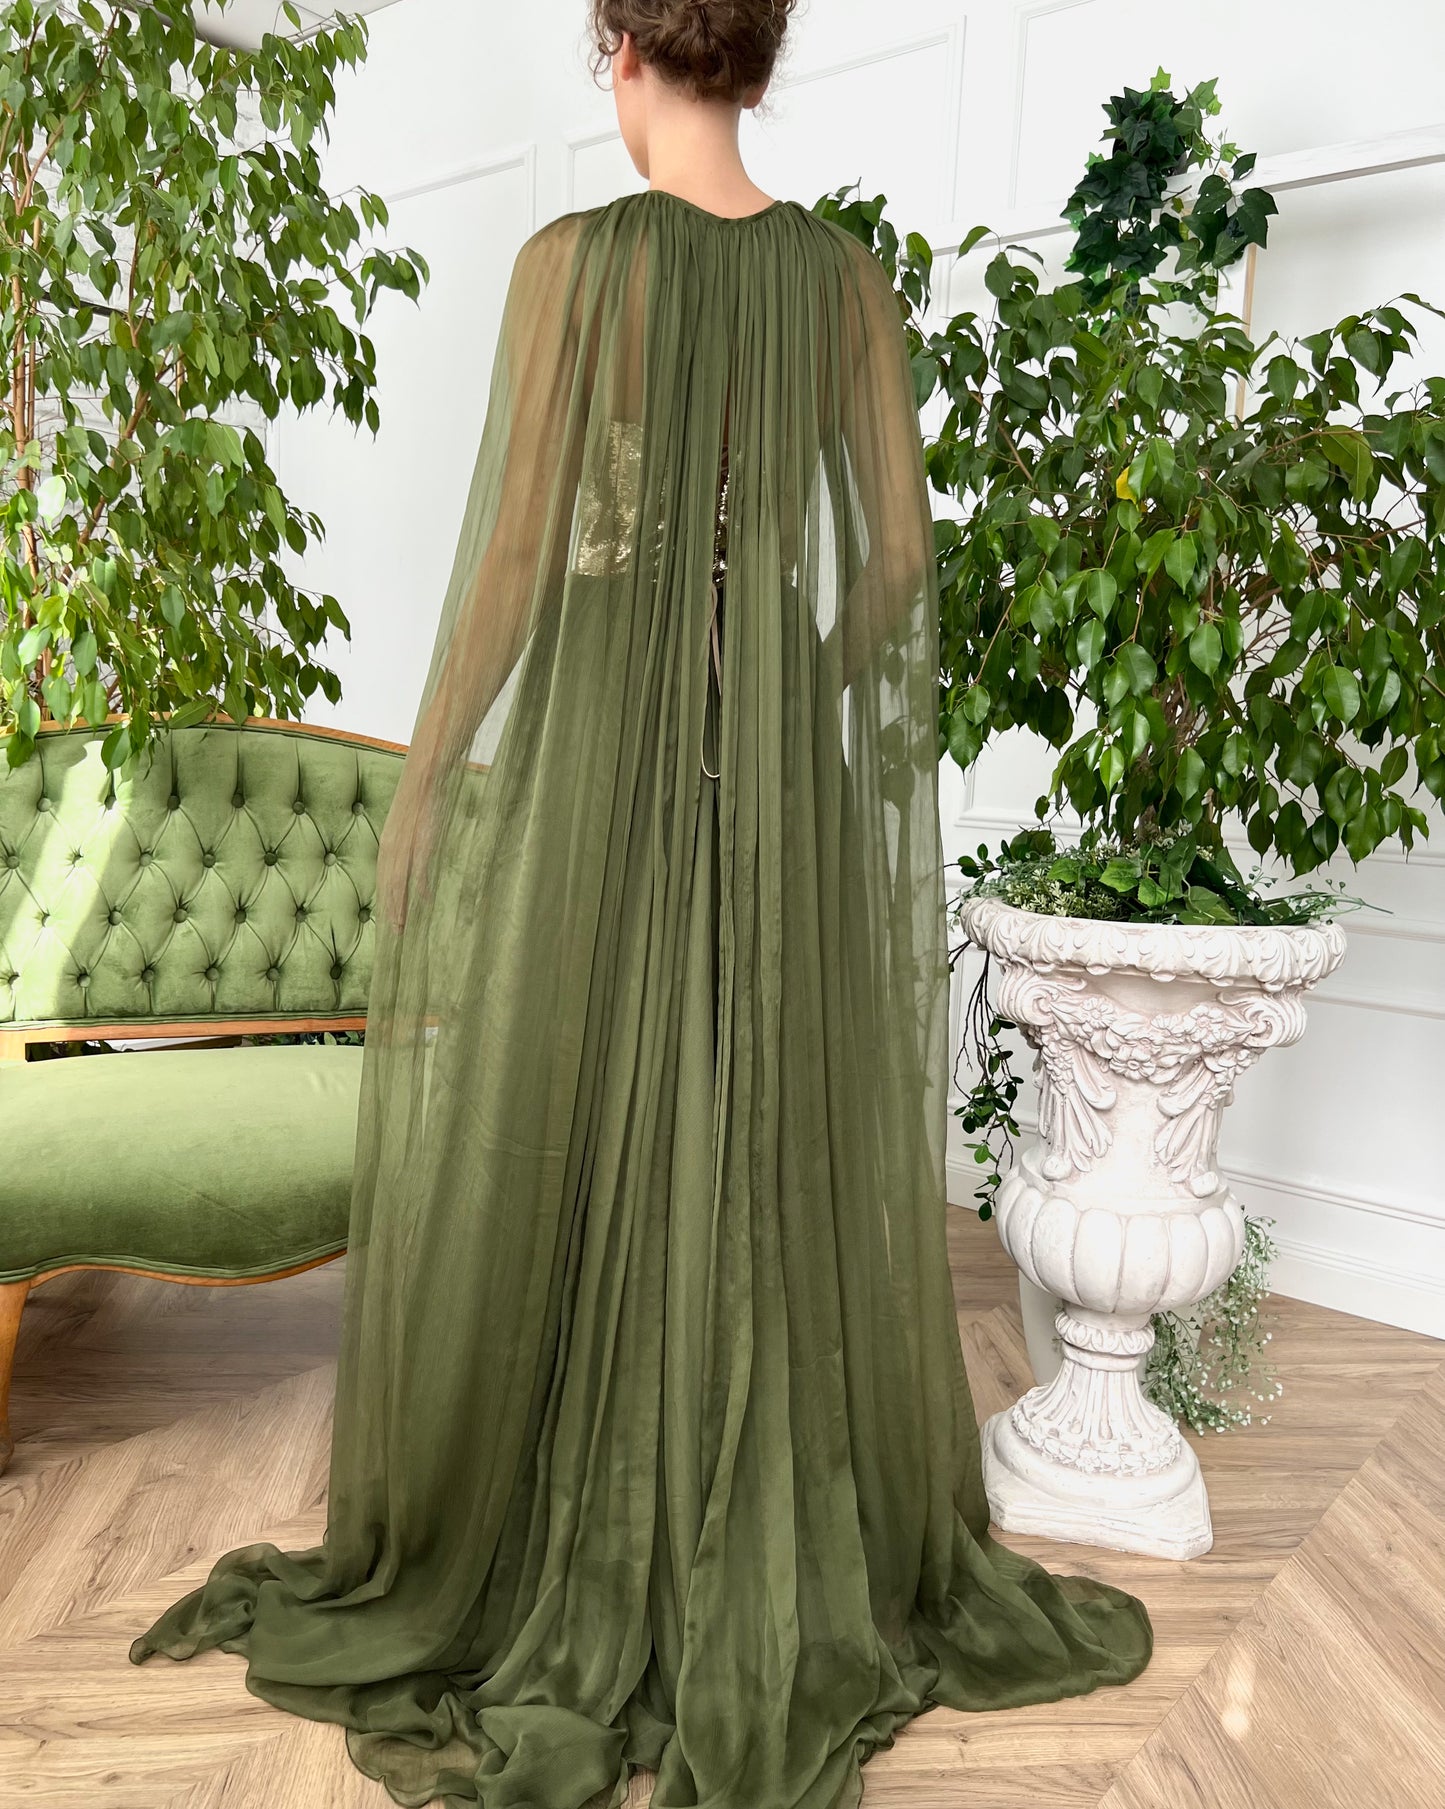 Green A-Line dress with cape and no sleeves